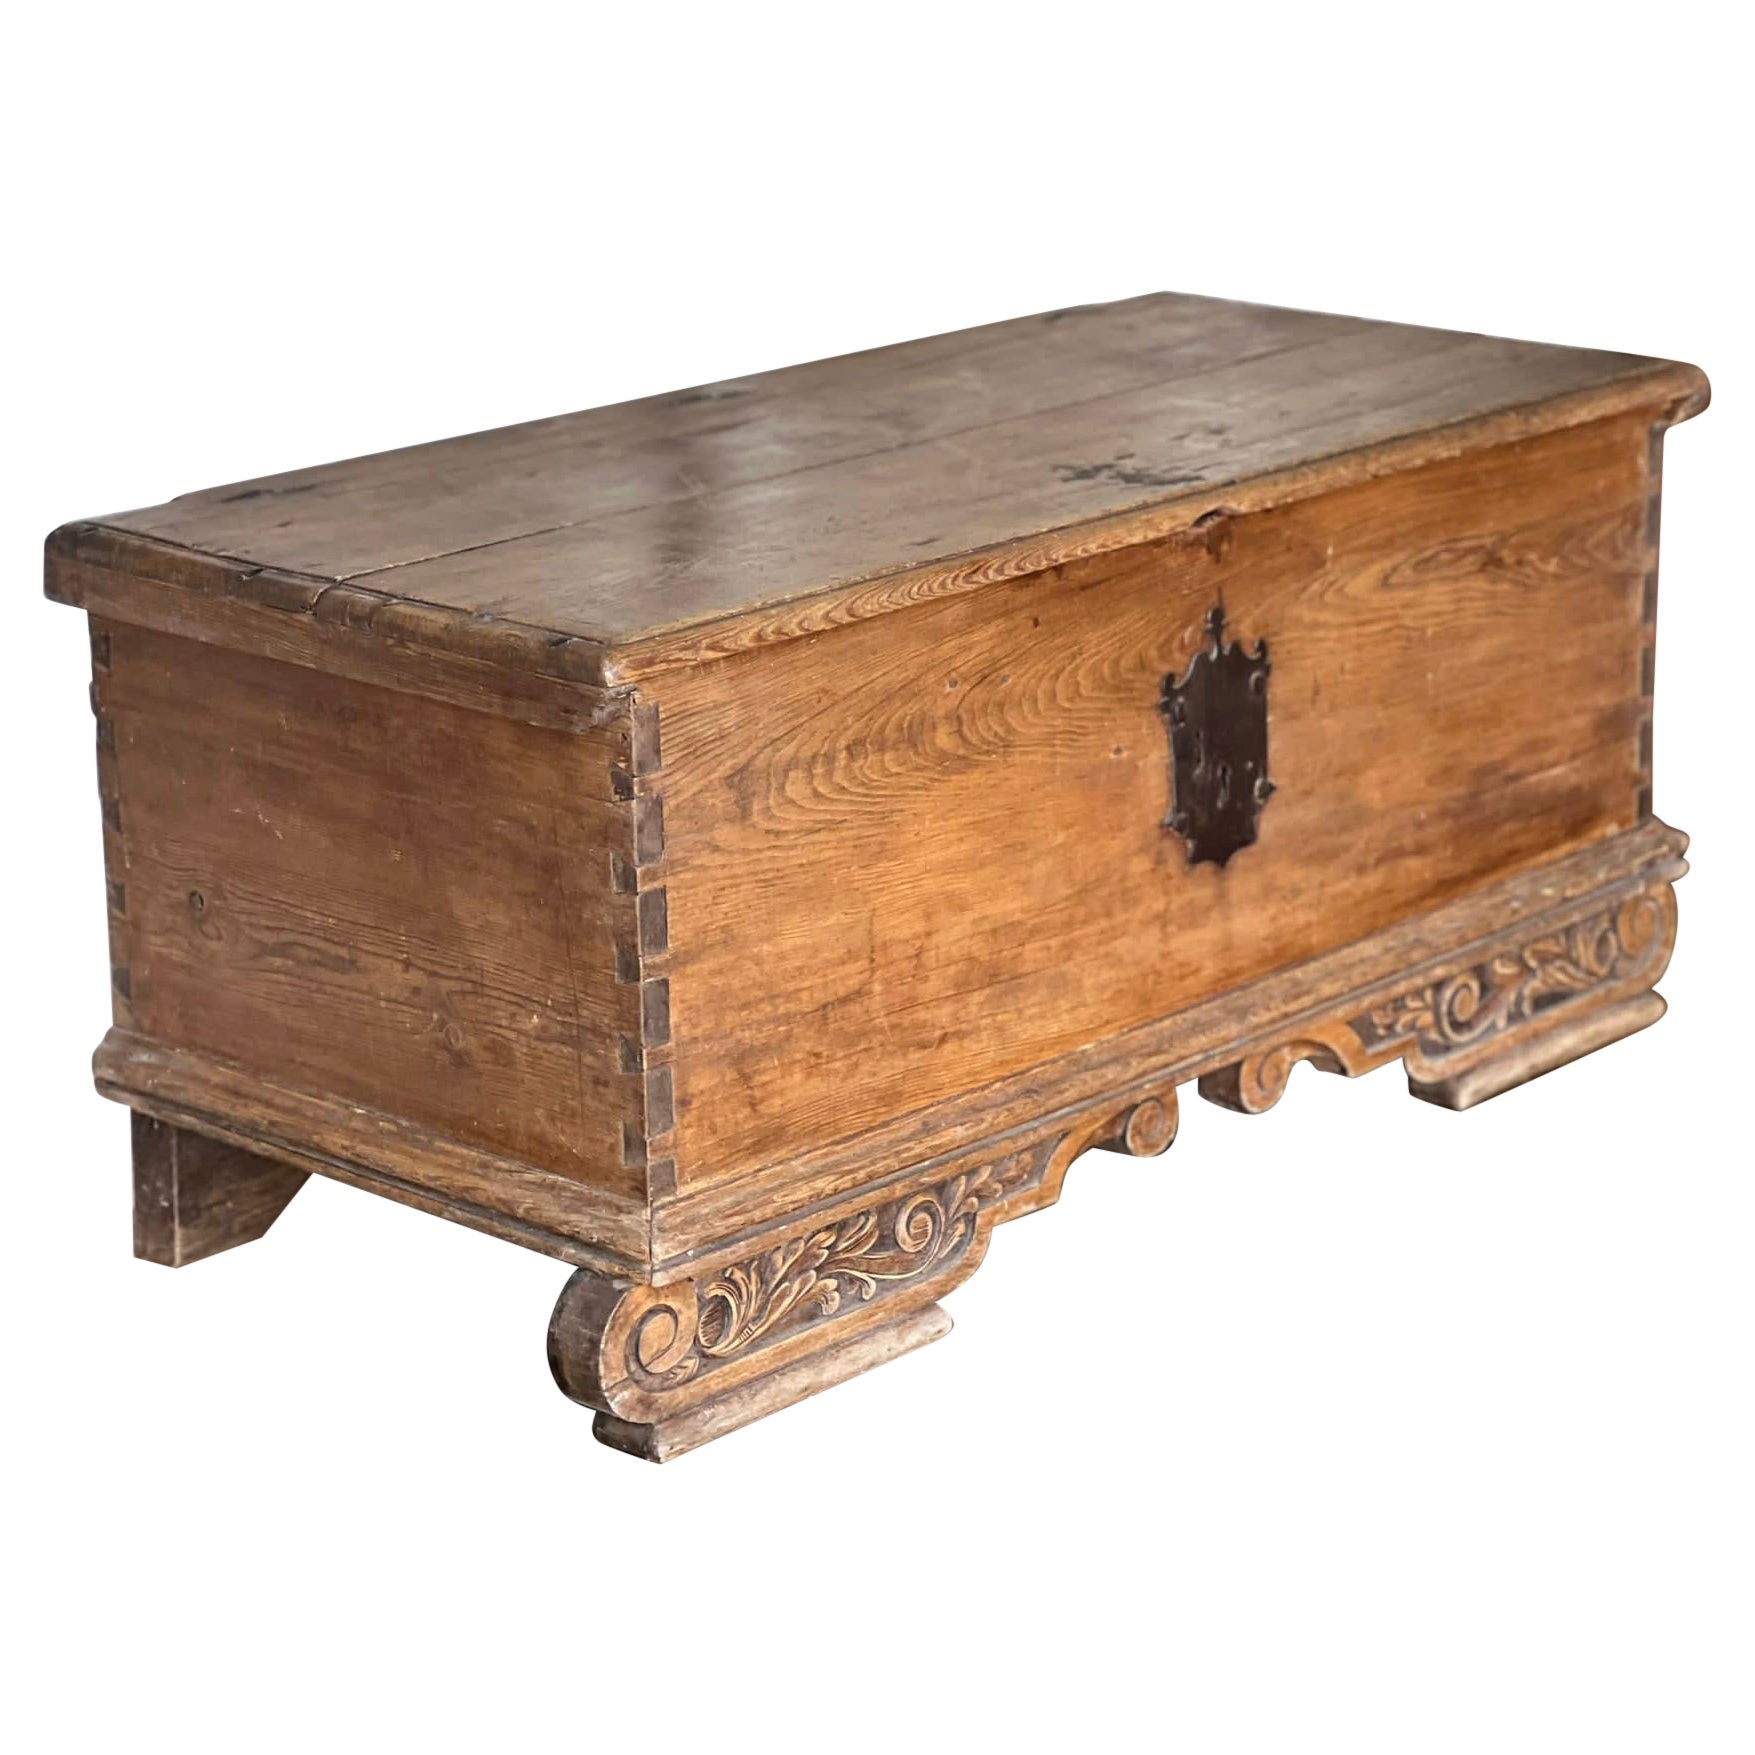 Early French Pine Decorative Trunk